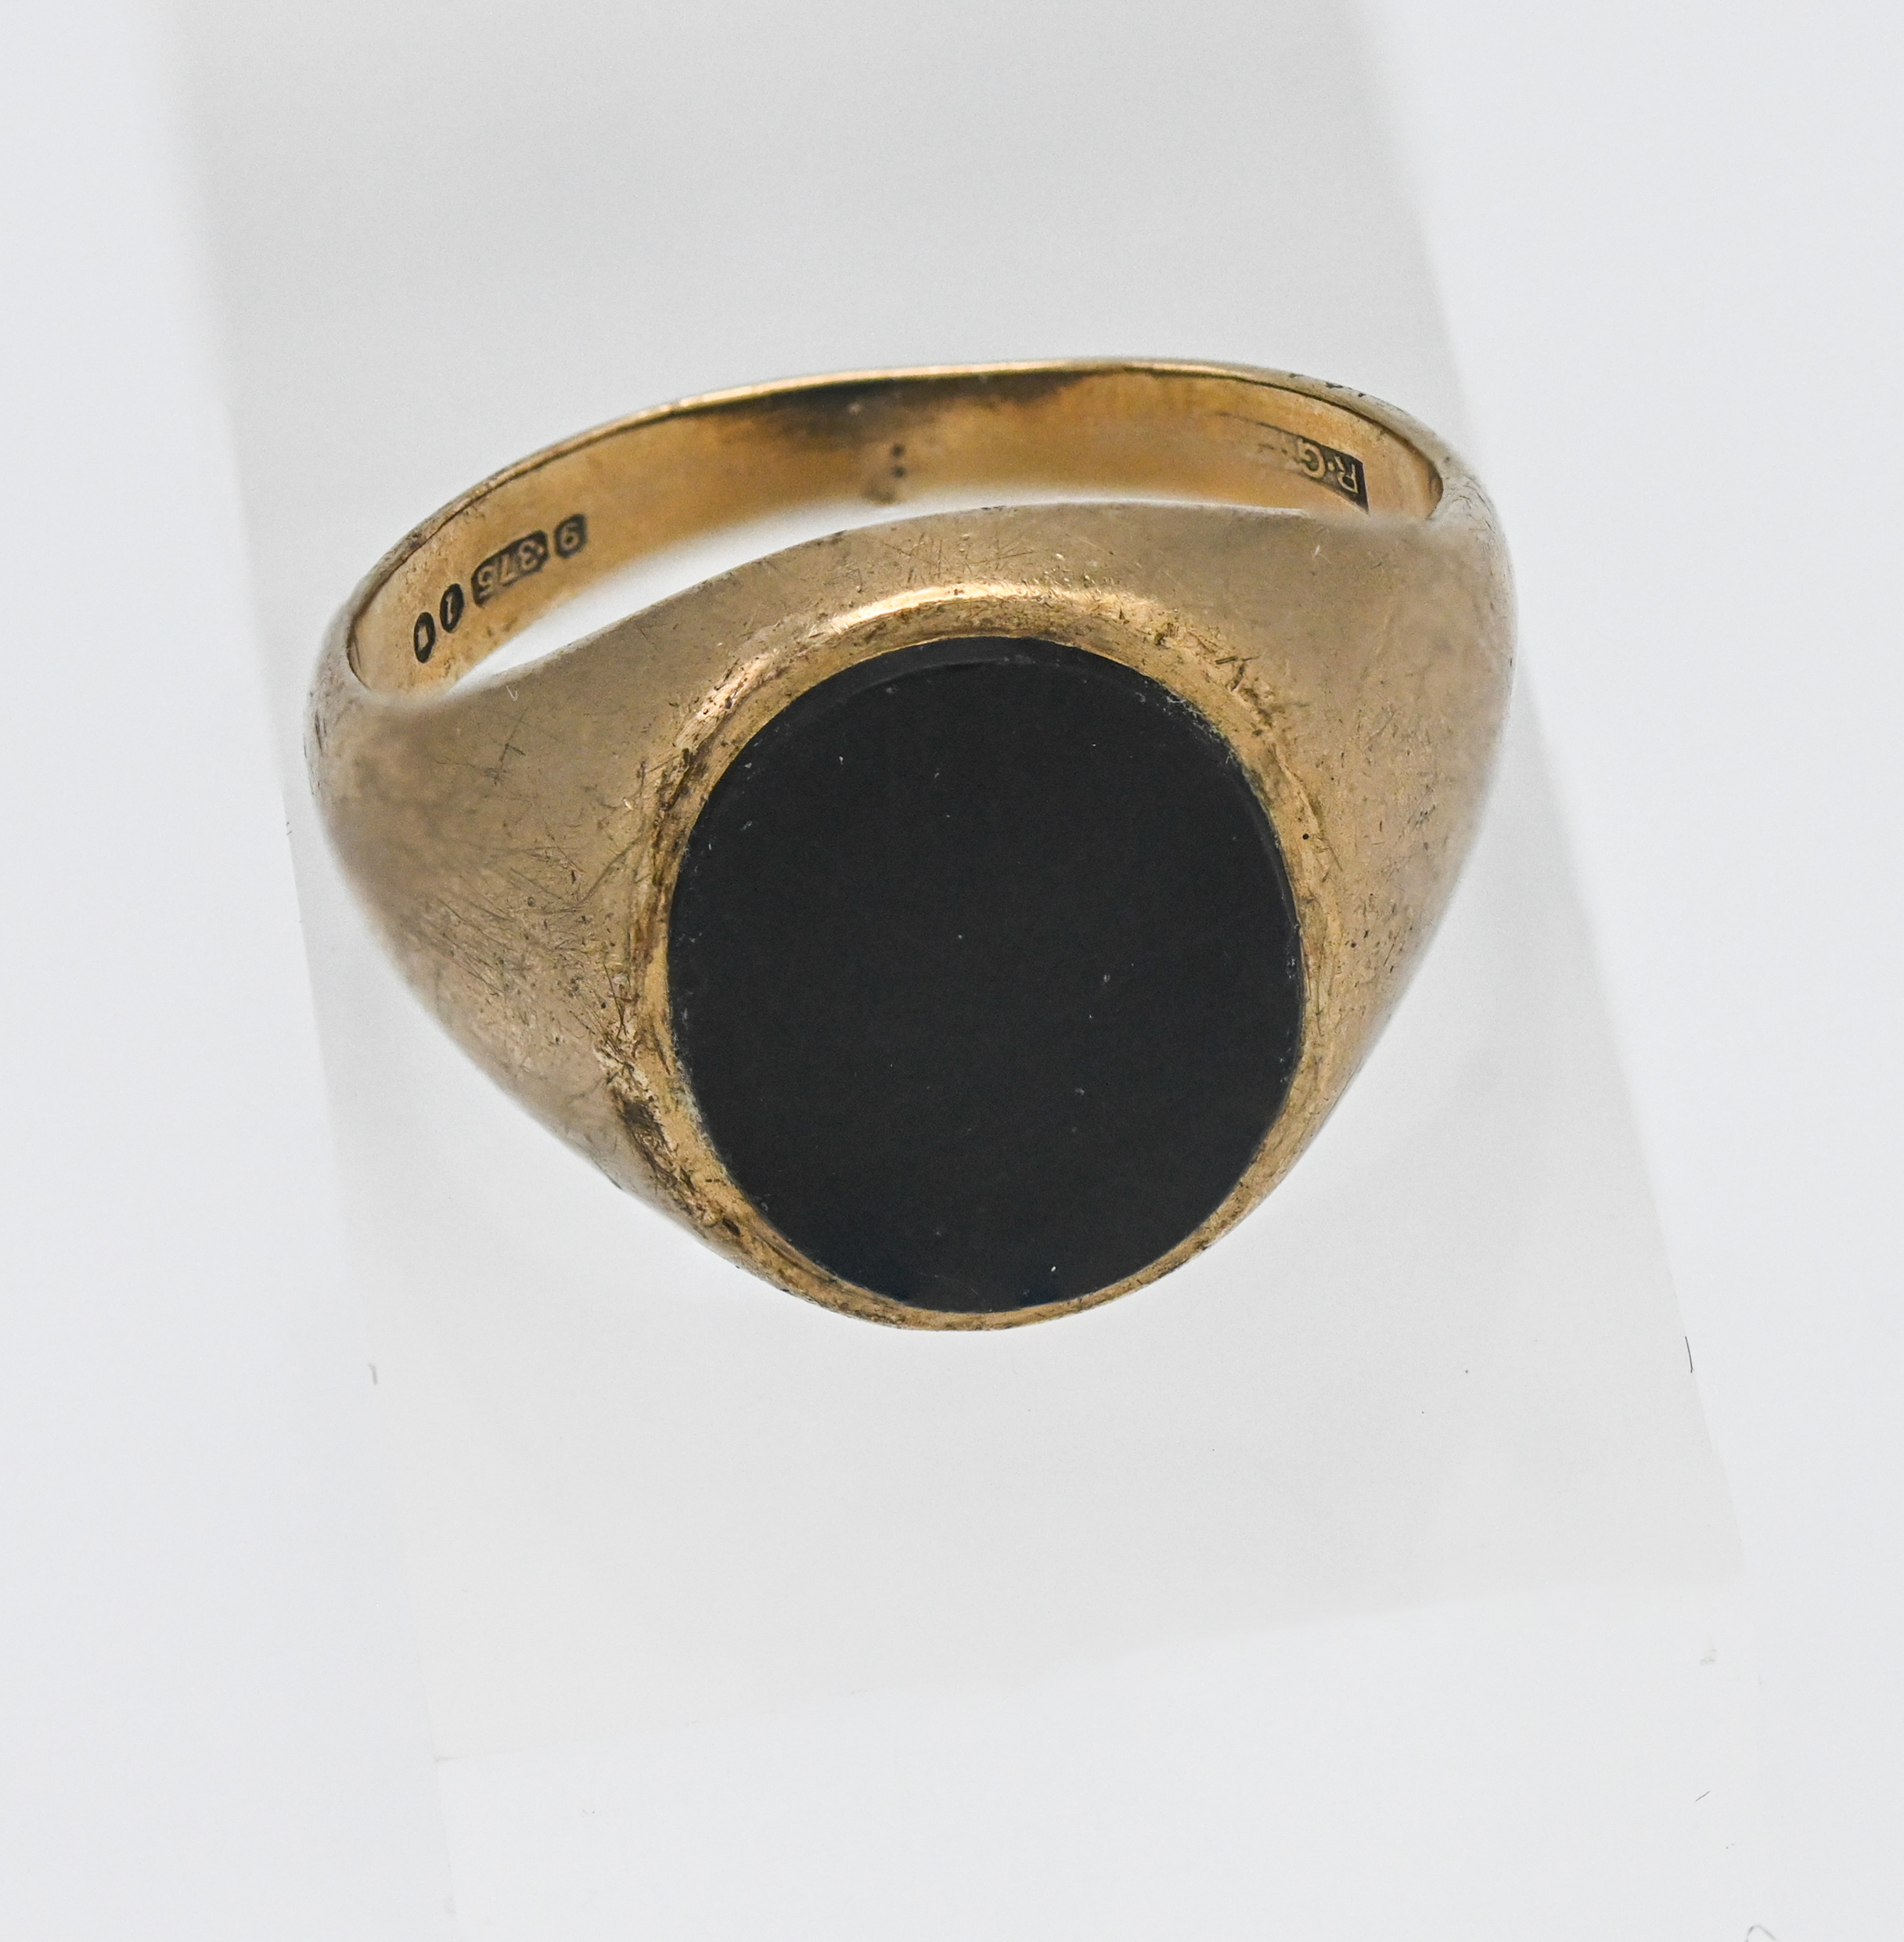 A gents 9 carat gold bloodstone ring. 5.8 grams